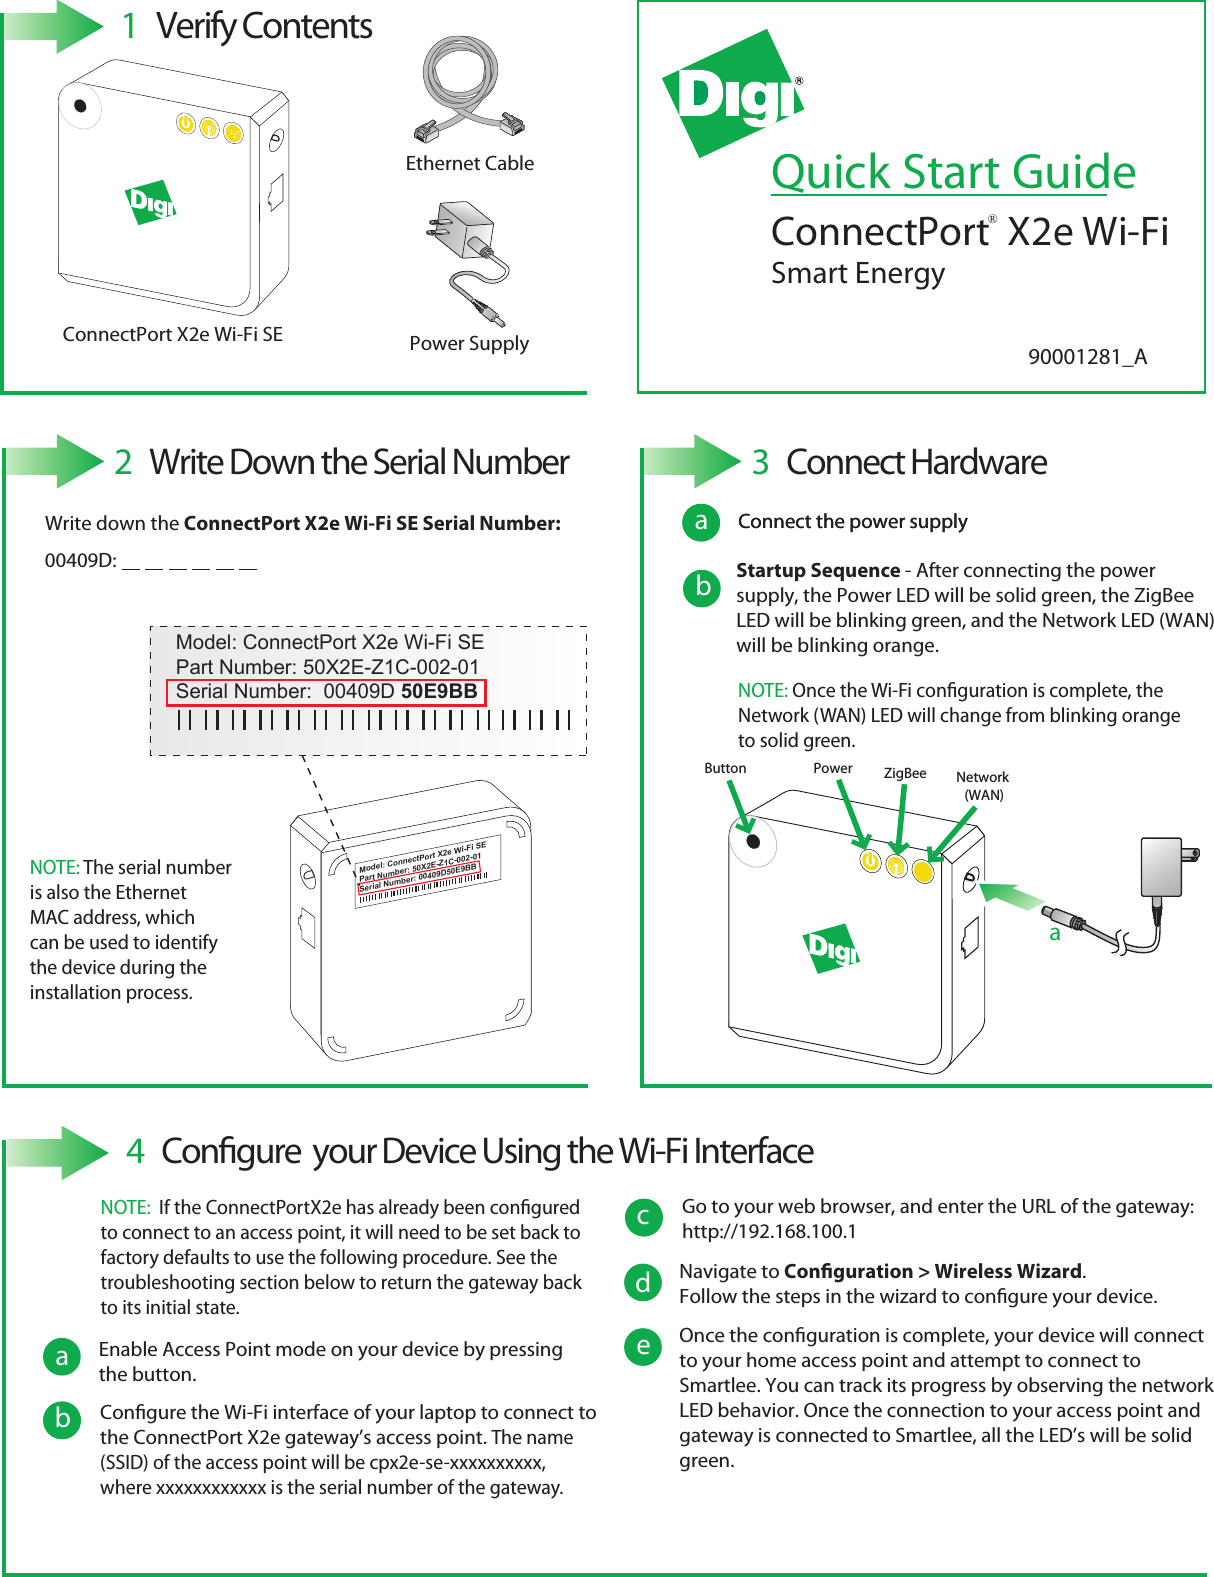 Quick Start GuideConnectPort  X2e Wi-Fi Smart EnergyPower SupplyEthernet CableConnectPort X2e Wi-Fi SE 1  Verify Contents2  Write Down the Serial Number®Model: ConnectPort X2e Wi-Fi SEPart Number: 50X2E-Z1C-002-01Serial Number: 00409D50E9BBModel: ConnectPort X2e Wi-Fi SEPart Number: 50X2E-Z1C-002-01Serial Number:  00409D 50E9BB3  Connect HardwarePower  ZigBee Network (WAN)Button aConnect the power supplyWrite down the ConnectPort X2e Wi-Fi SE Serial Number:00409D:  NOTE: The serial number is also the Ethernet MAC address, which can be used to identify the device during theinstallation process.baConnect the power supplyStartup Sequence - After connecting the power supply, the Power LED will be solid green, the ZigBee LED will be blinking green, and the Network LED (WAN) will be blinking orange.NOTE: Once the Wi-Fi conguration is complete, the Network (WAN) LED will change from blinking orange to solid green.a4  Congure  your Device Using the Wi-Fi InterfaceacEnable Access Point mode on your device by pressing the button.bdCongure the Wi-Fi interface of your laptop to connect to the ConnectPort X2e gateway’s access point. The name (SSID) of the access point will be cpx2e-se-xxxxxxxxxx, where xxxxxxxxxxxx is the serial number of the gateway.cc Go to your web browser, and enter the URL of the gateway: http://192.168.100.1NOTE:  If the ConnectPortX2e has already been congured to connect to an access point, it will need to be set back to factory defaults to use the following procedure. See the troubleshooting section below to return the gateway back to its initial state. Navigate to Conguration &gt; Wireless Wizard.Follow the steps in the wizard to congure your device.eOnce the conguration is complete, your device will connect to your home access point and attempt to connect to Smartlee. You can track its progress by observing the network LED behavior. Once the connection to your access point and gateway is connected to Smartlee, all the LED’s will be solid green.90001281_A